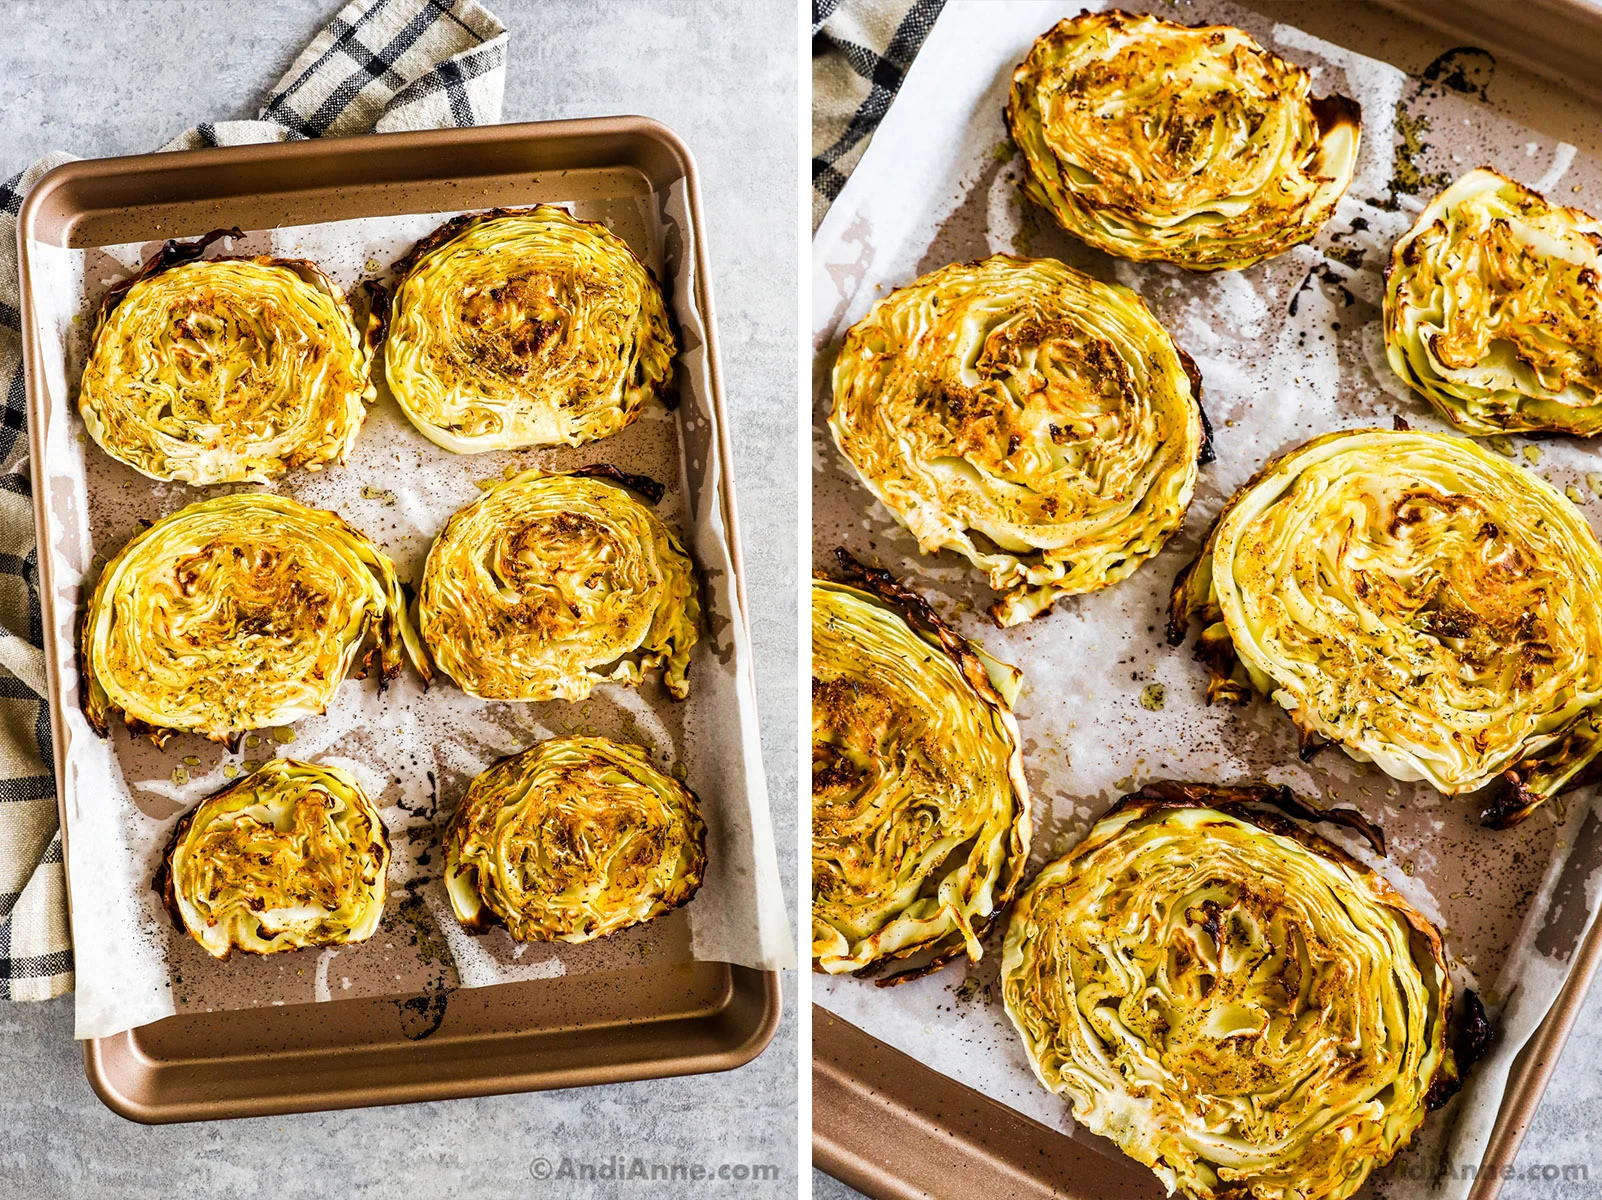 Two images of  sliced roasted cabbage steaks.